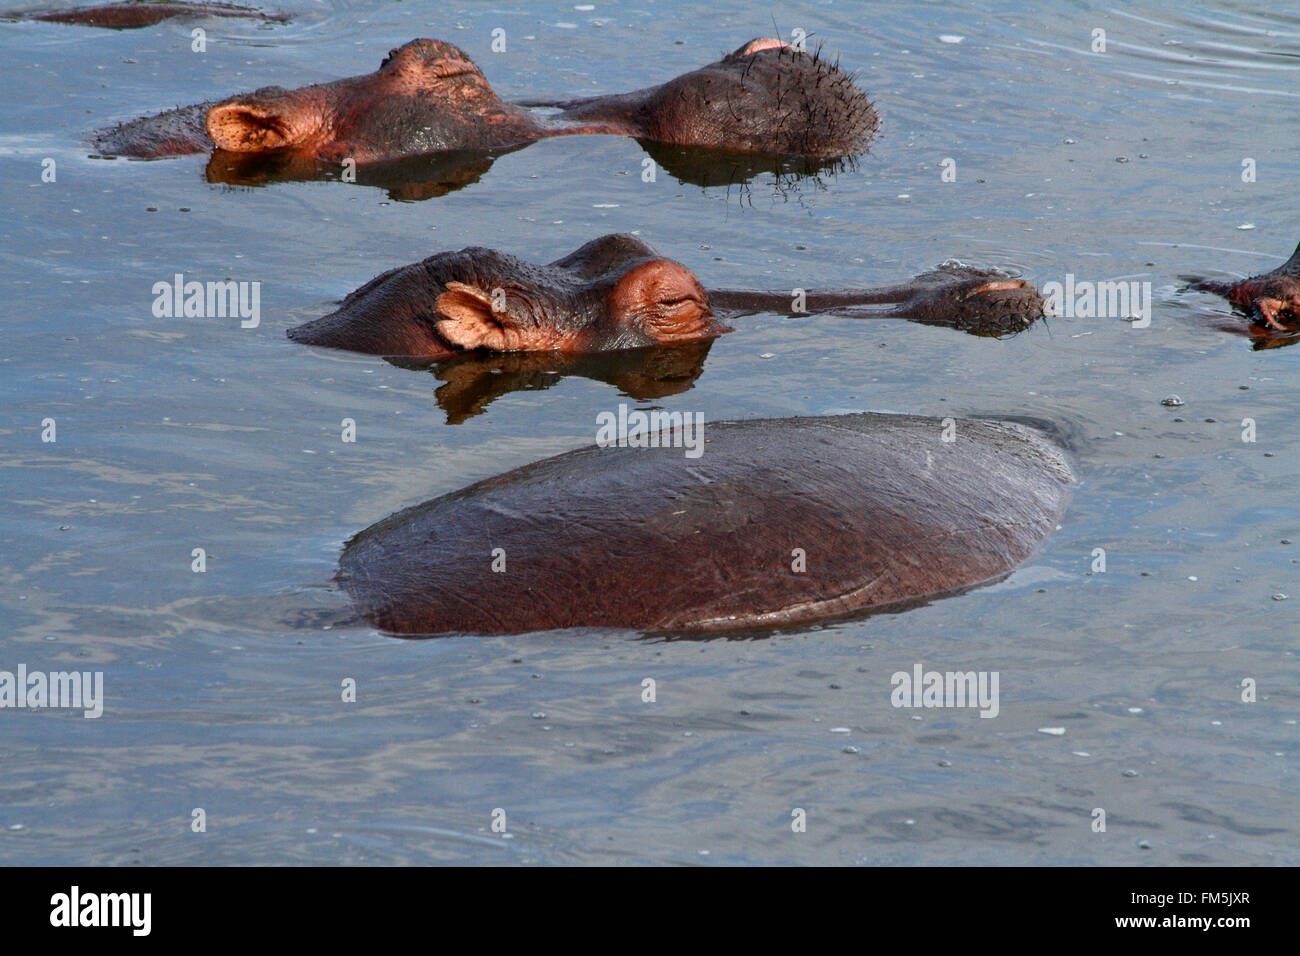 A couple of sleeping hippopotamus heads just above the surface of the water Stock Photo